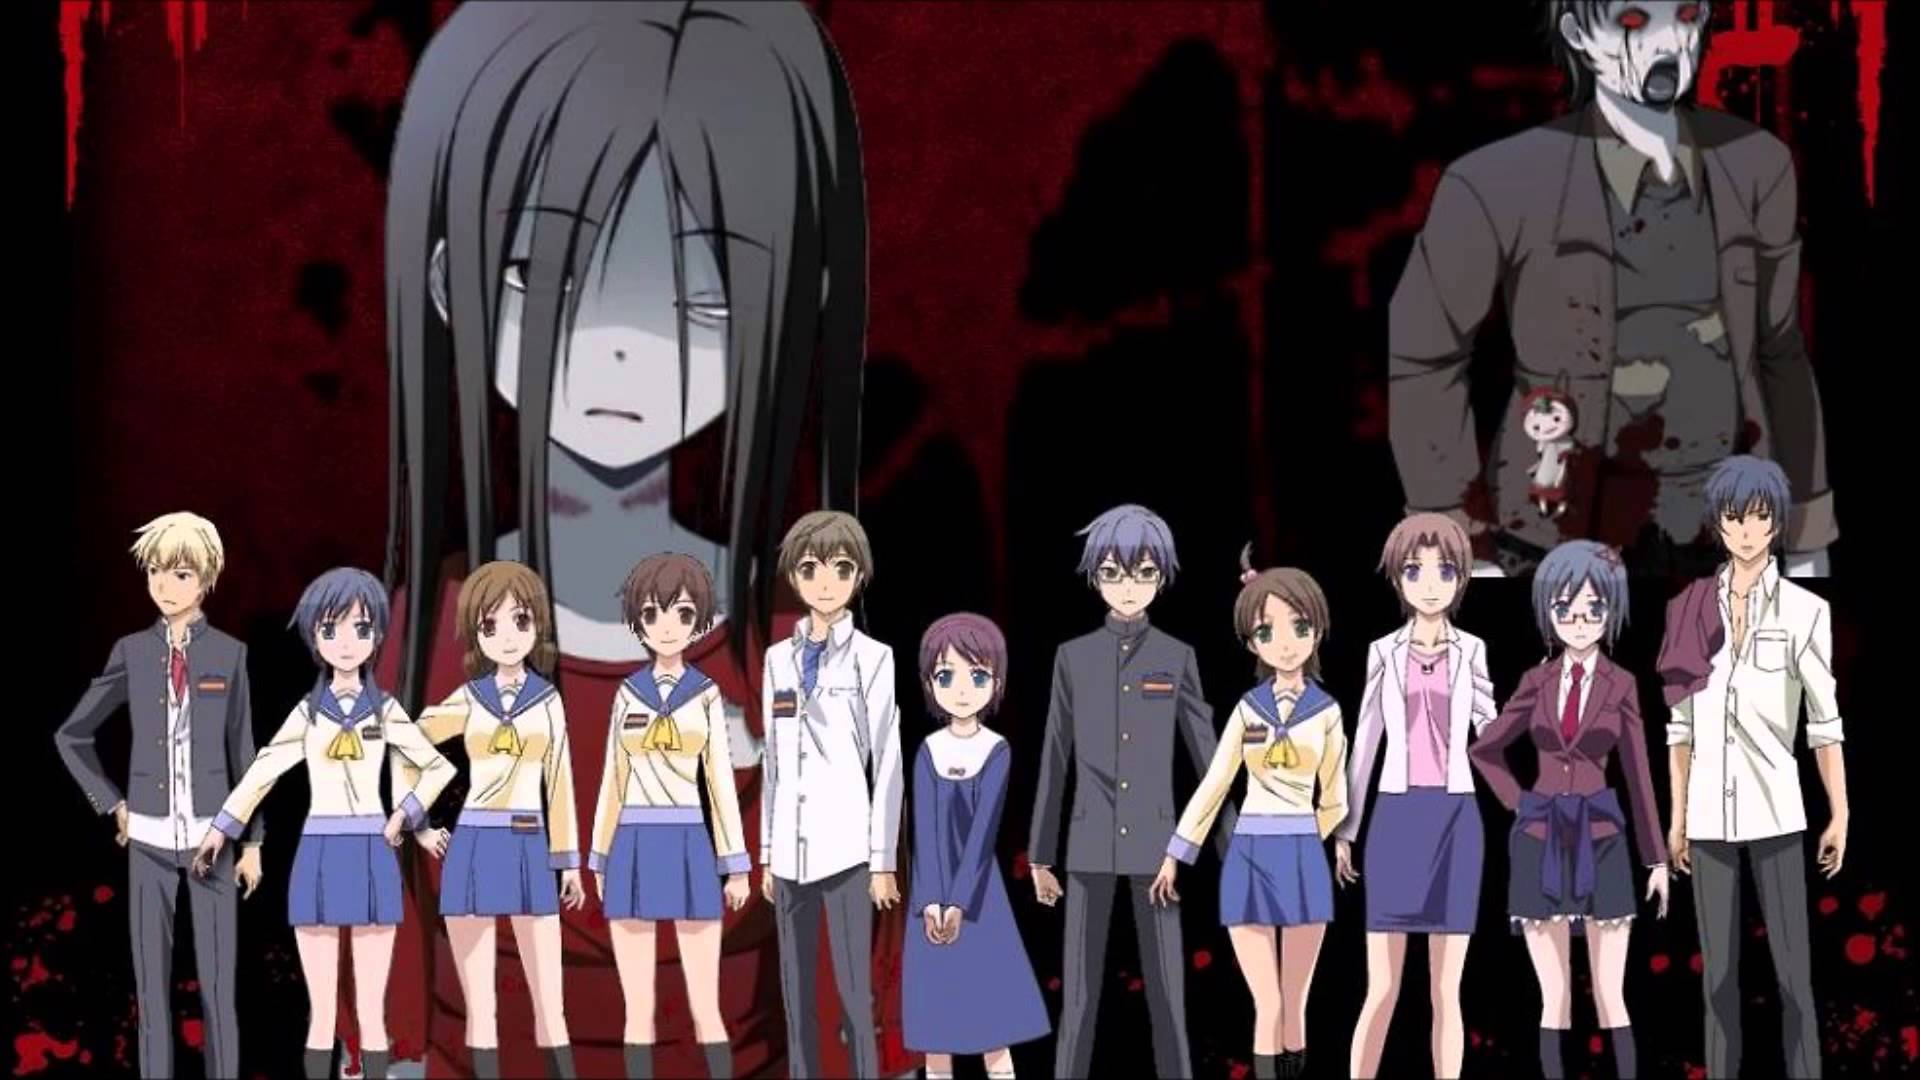 Corpse Party wallpaper, Anime, HQ Corpse Party pictureK Wallpaper 2019